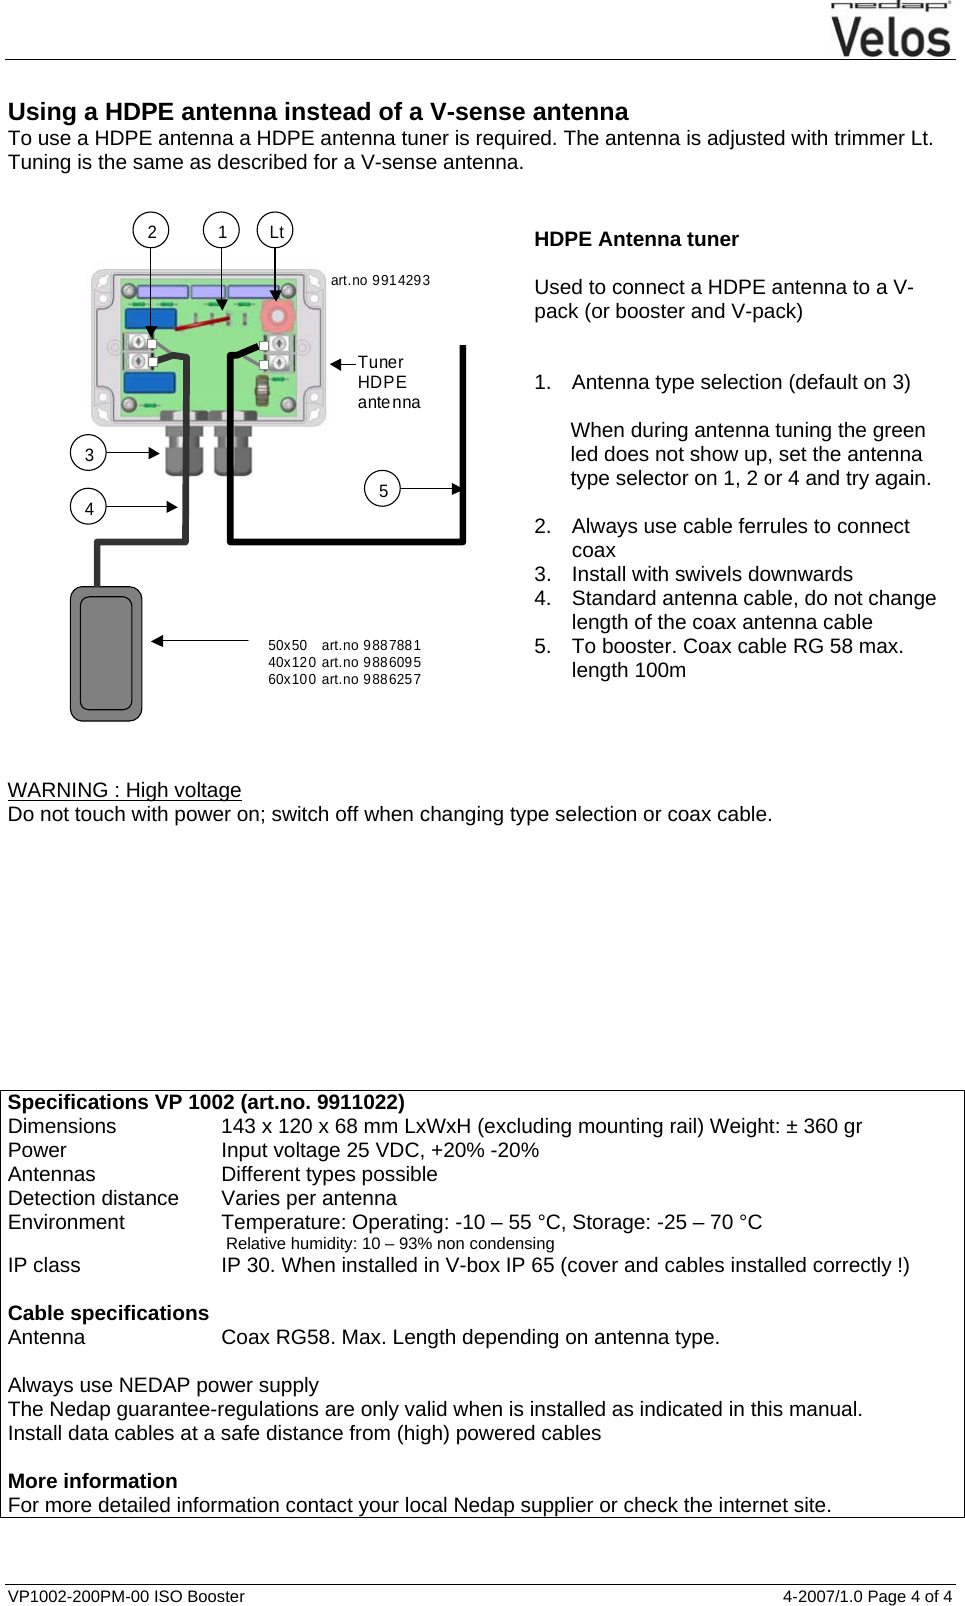  VP1002-200PM-00 ISO Booster  4-2007/1.0 Page 4 of 4    Using a HDPE antenna instead of a V-sense antenna To use a HDPE antenna a HDPE antenna tuner is required. The antenna is adjusted with trimmer Lt. Tuning is the same as described for a V-sense antenna.  1 2 3 50x50    art.no 9887881 40x120 art.no 9886095 60x100 art.no 9886257 4  5 Tuner HDPE antenna Lt art.no 9914293   HDPE Antenna tuner  Used to connect a HDPE antenna to a V-pack (or booster and V-pack)   1.  Antenna type selection (default on 3)  When during antenna tuning the green led does not show up, set the antenna type selector on 1, 2 or 4 and try again.  2.  Always use cable ferrules to connect coax 3.  Install with swivels downwards 4.  Standard antenna cable, do not change length of the coax antenna cable 5.  To booster. Coax cable RG 58 max. length 100m     WARNING : High voltage Do not touch with power on; switch off when changing type selection or coax cable.            Specifications VP 1002 (art.no. 9911022) Dimensions  143 x 120 x 68 mm LxWxH (excluding mounting rail) Weight: ± 360 gr Power  Input voltage 25 VDC, +20% -20% Antennas  Different types possible Detection distance  Varies per antenna Environment  Temperature: Operating: -10 – 55 °C, Storage: -25 – 70 °C  Relative humidity: 10 – 93% non condensing IP class  IP 30. When installed in V-box IP 65 (cover and cables installed correctly !)   Cable specifications Antenna  Coax RG58. Max. Length depending on antenna type.   Always use NEDAP power supply The Nedap guarantee-regulations are only valid when is installed as indicated in this manual. Install data cables at a safe distance from (high) powered cables  More information For more detailed information contact your local Nedap supplier or check the internet site.  